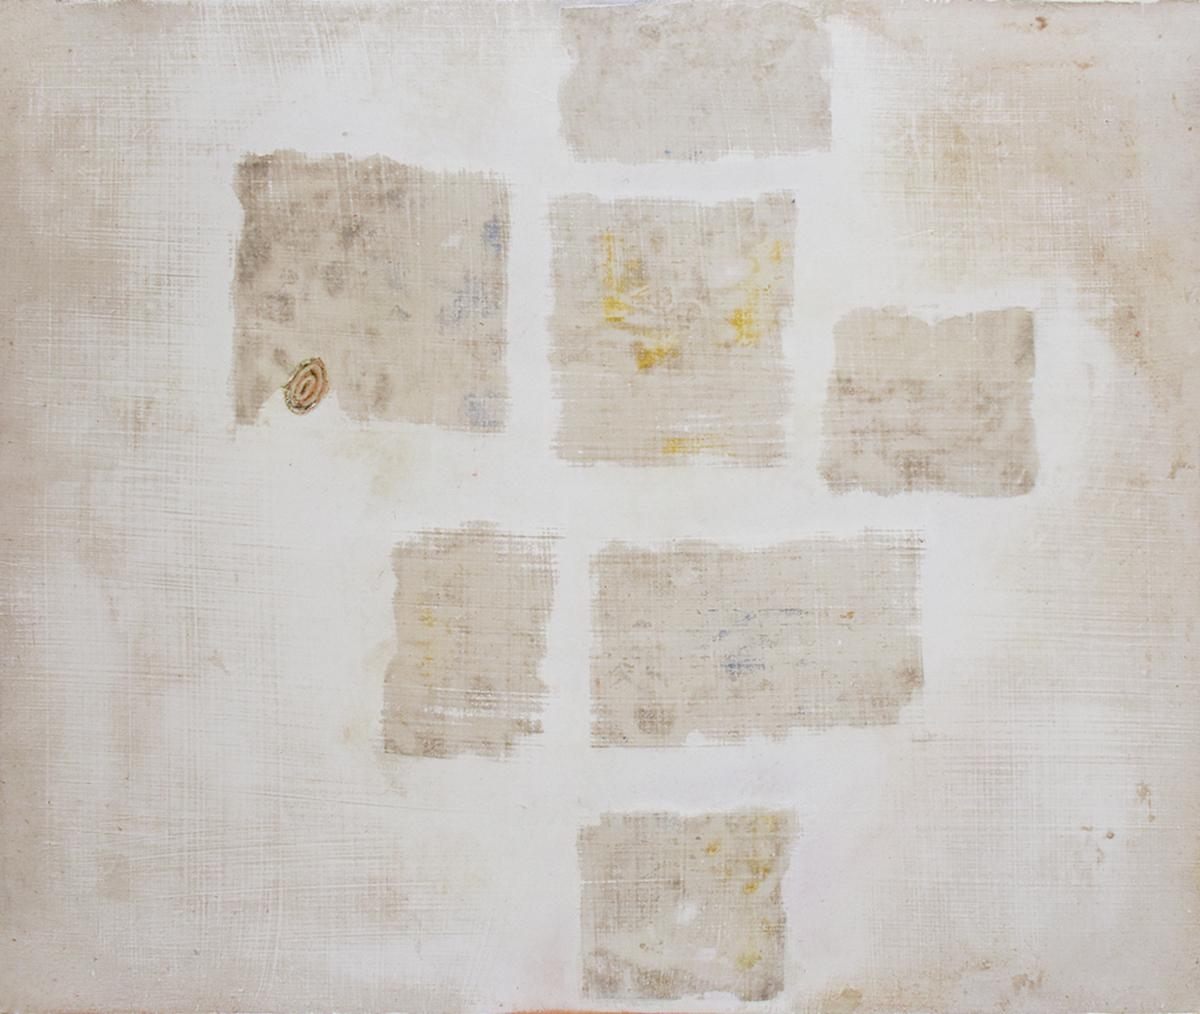 Untitled White 2 (Abstract Geometric Mixed Media Work on Wooden Panel)